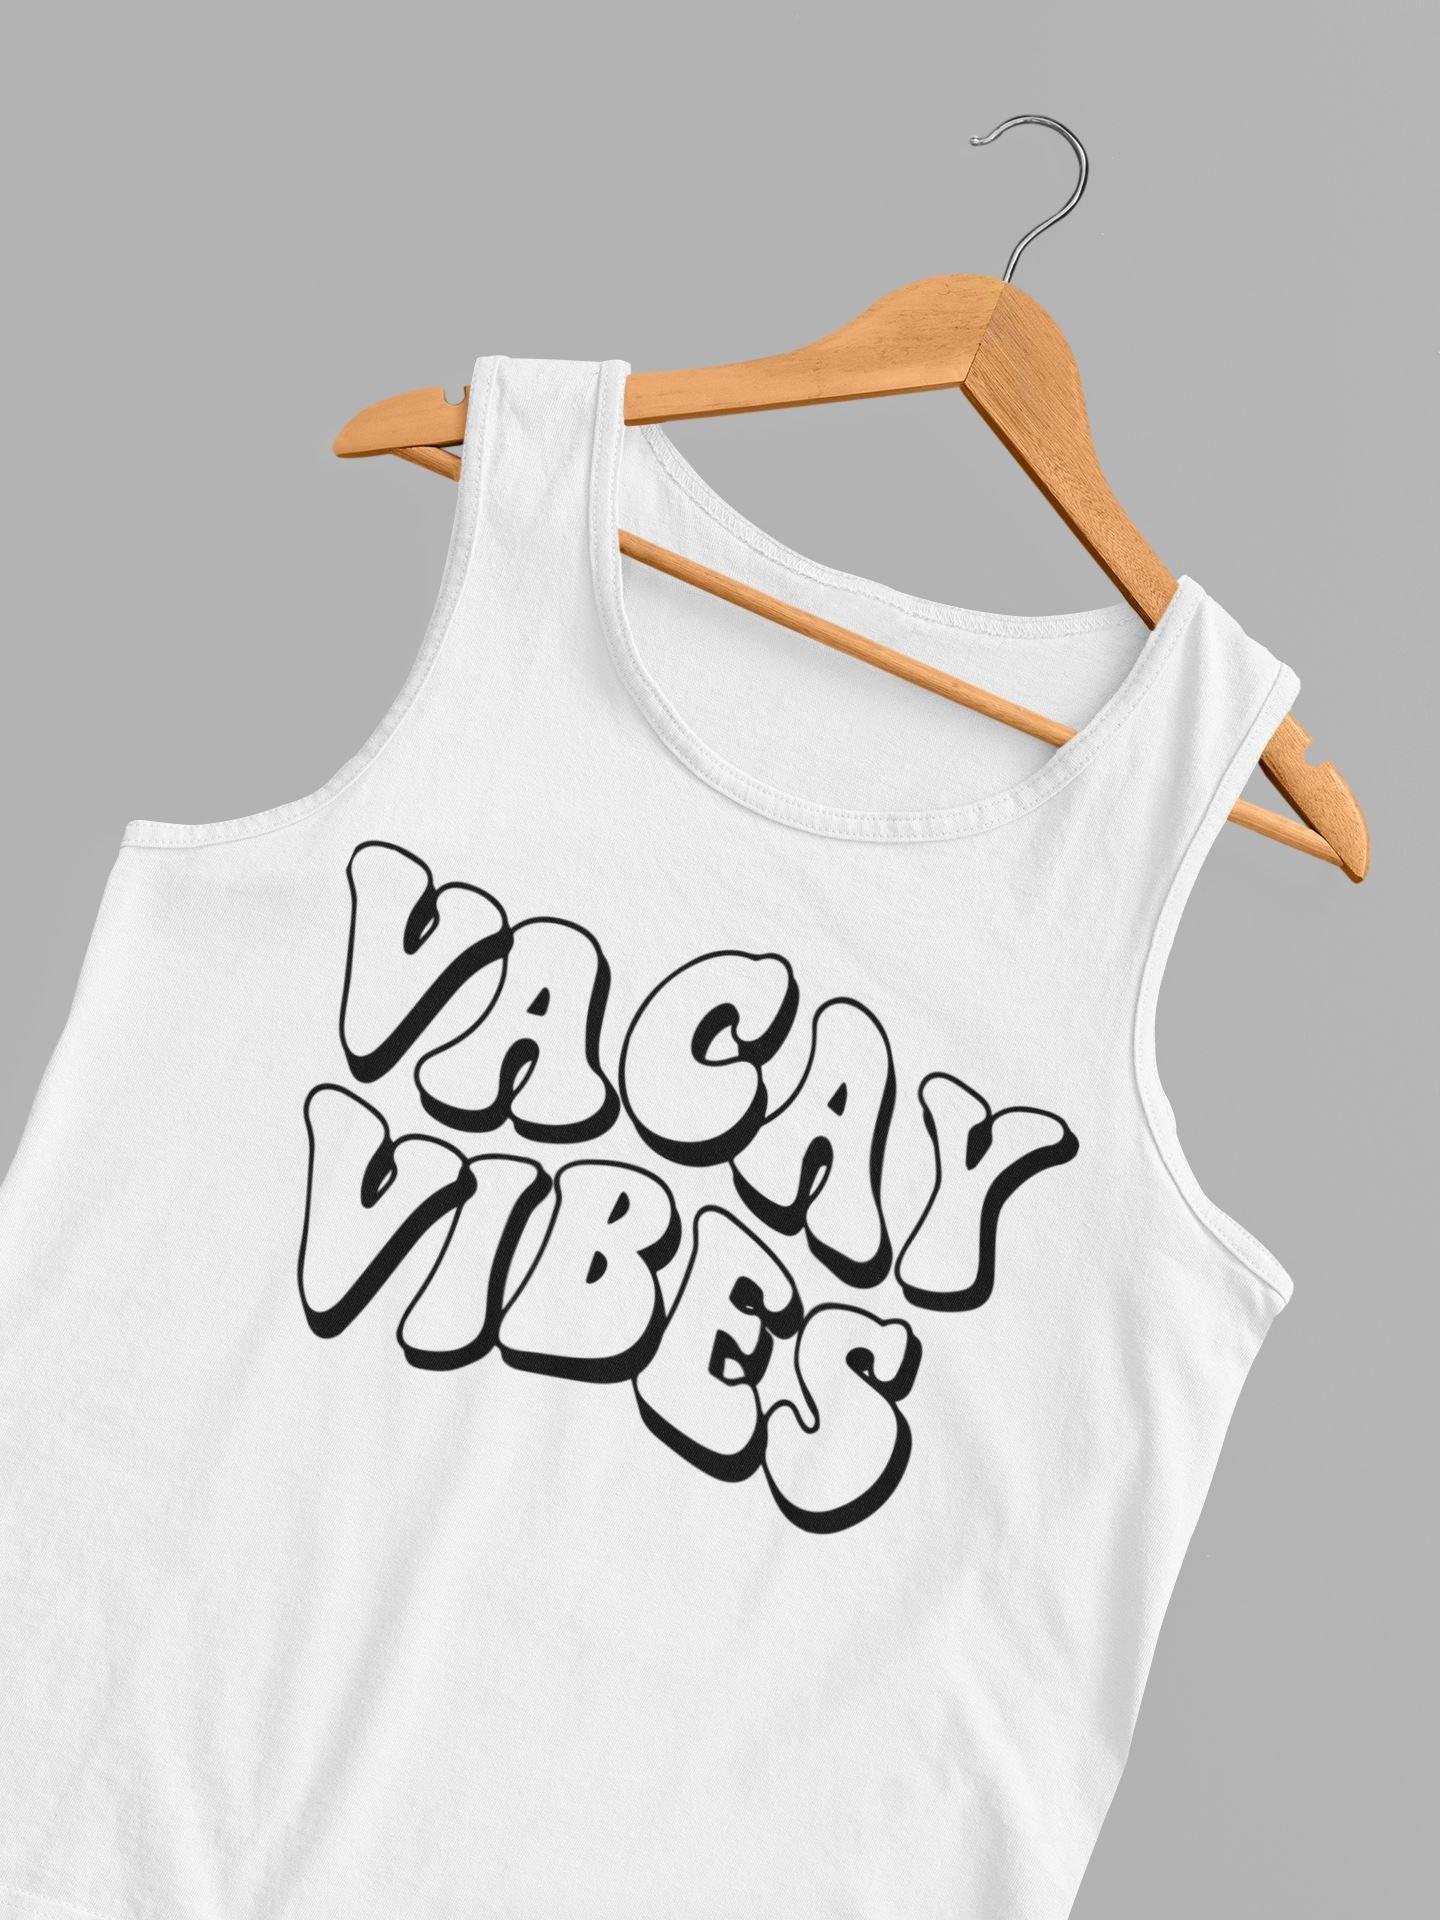 Vacay Vibes Vest Top